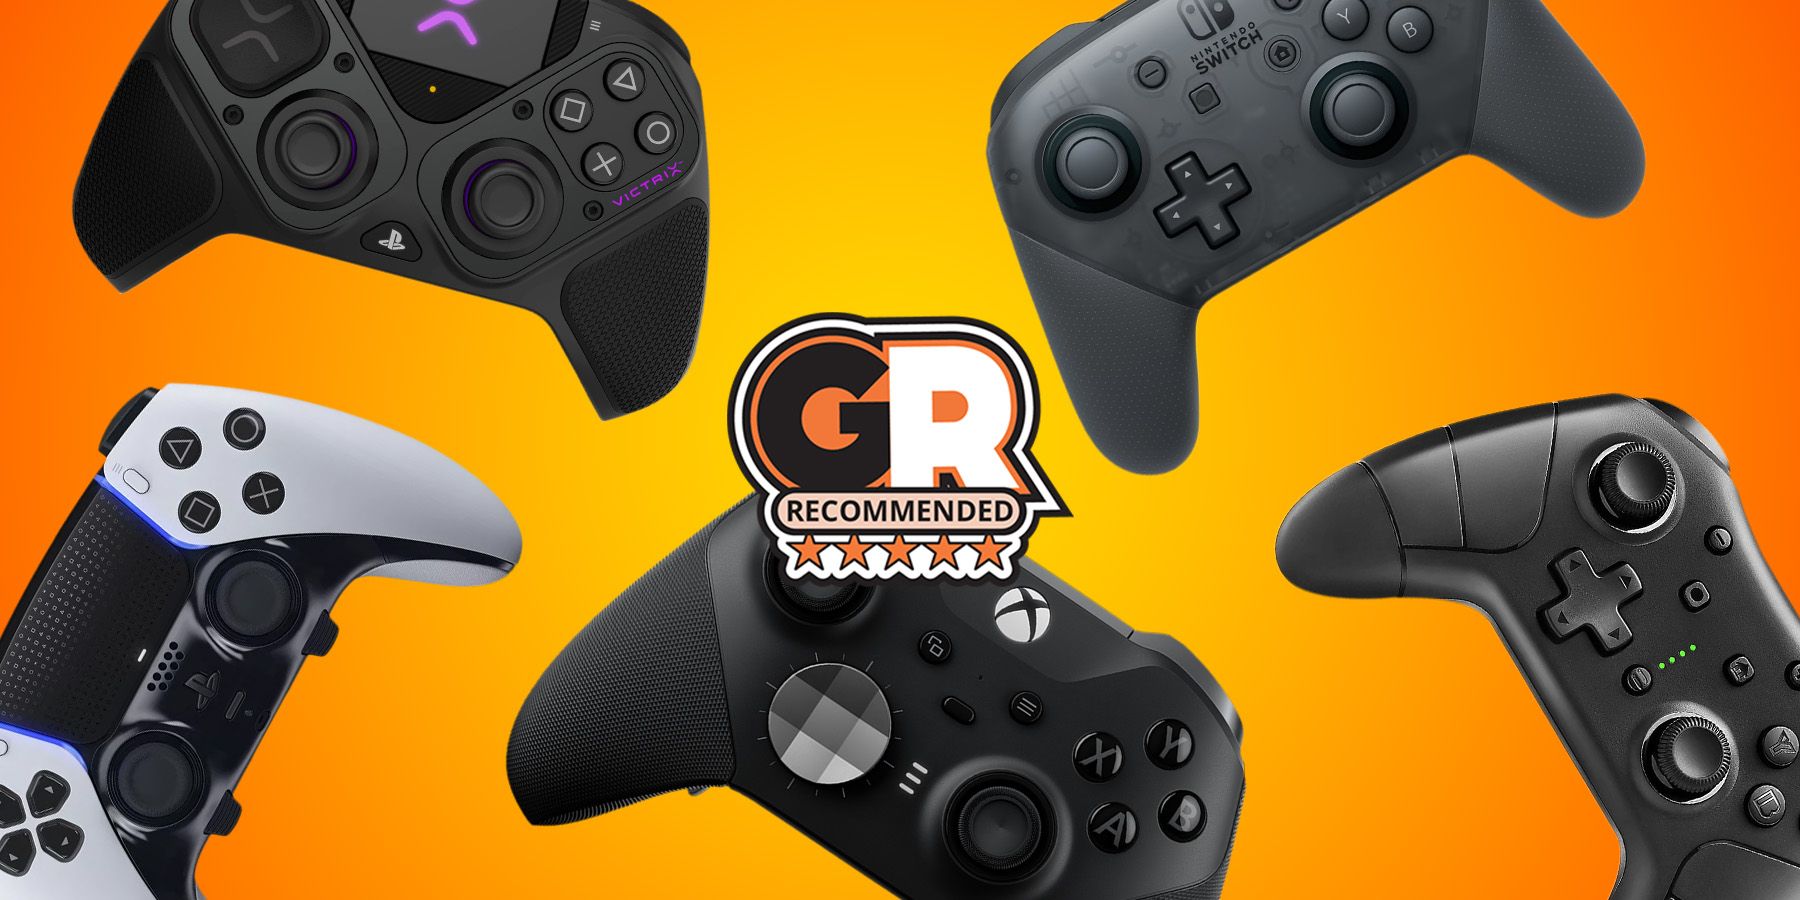 The Best Controllers for Sports Games Conclusion